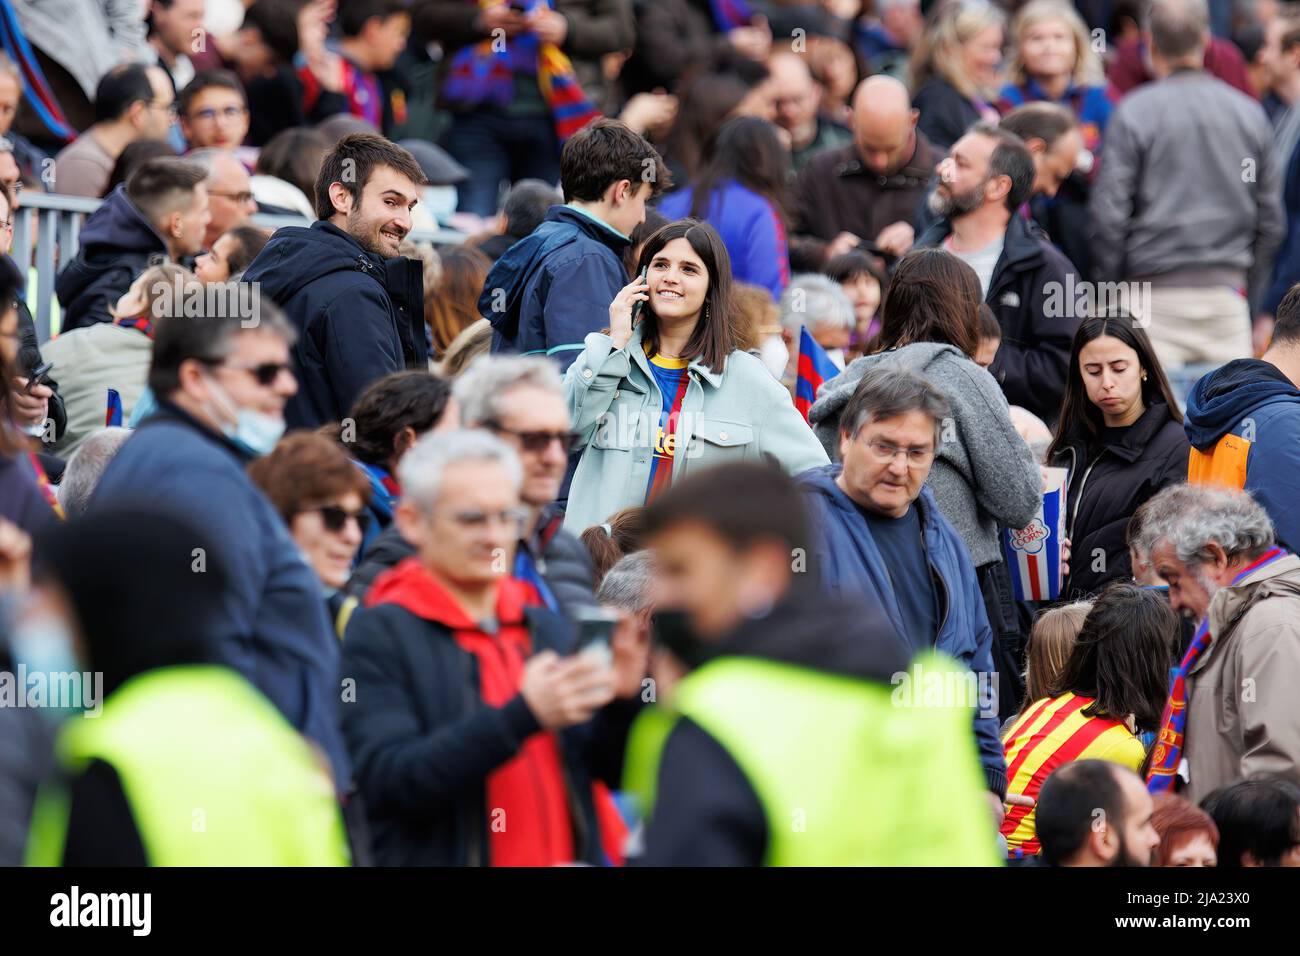 BARCELONA - APR 22: Fans cheering from the stands during the UEFA Women's Champions League match between FC Barcelona and VfL Wolfsburg at the Camp No Stock Photo